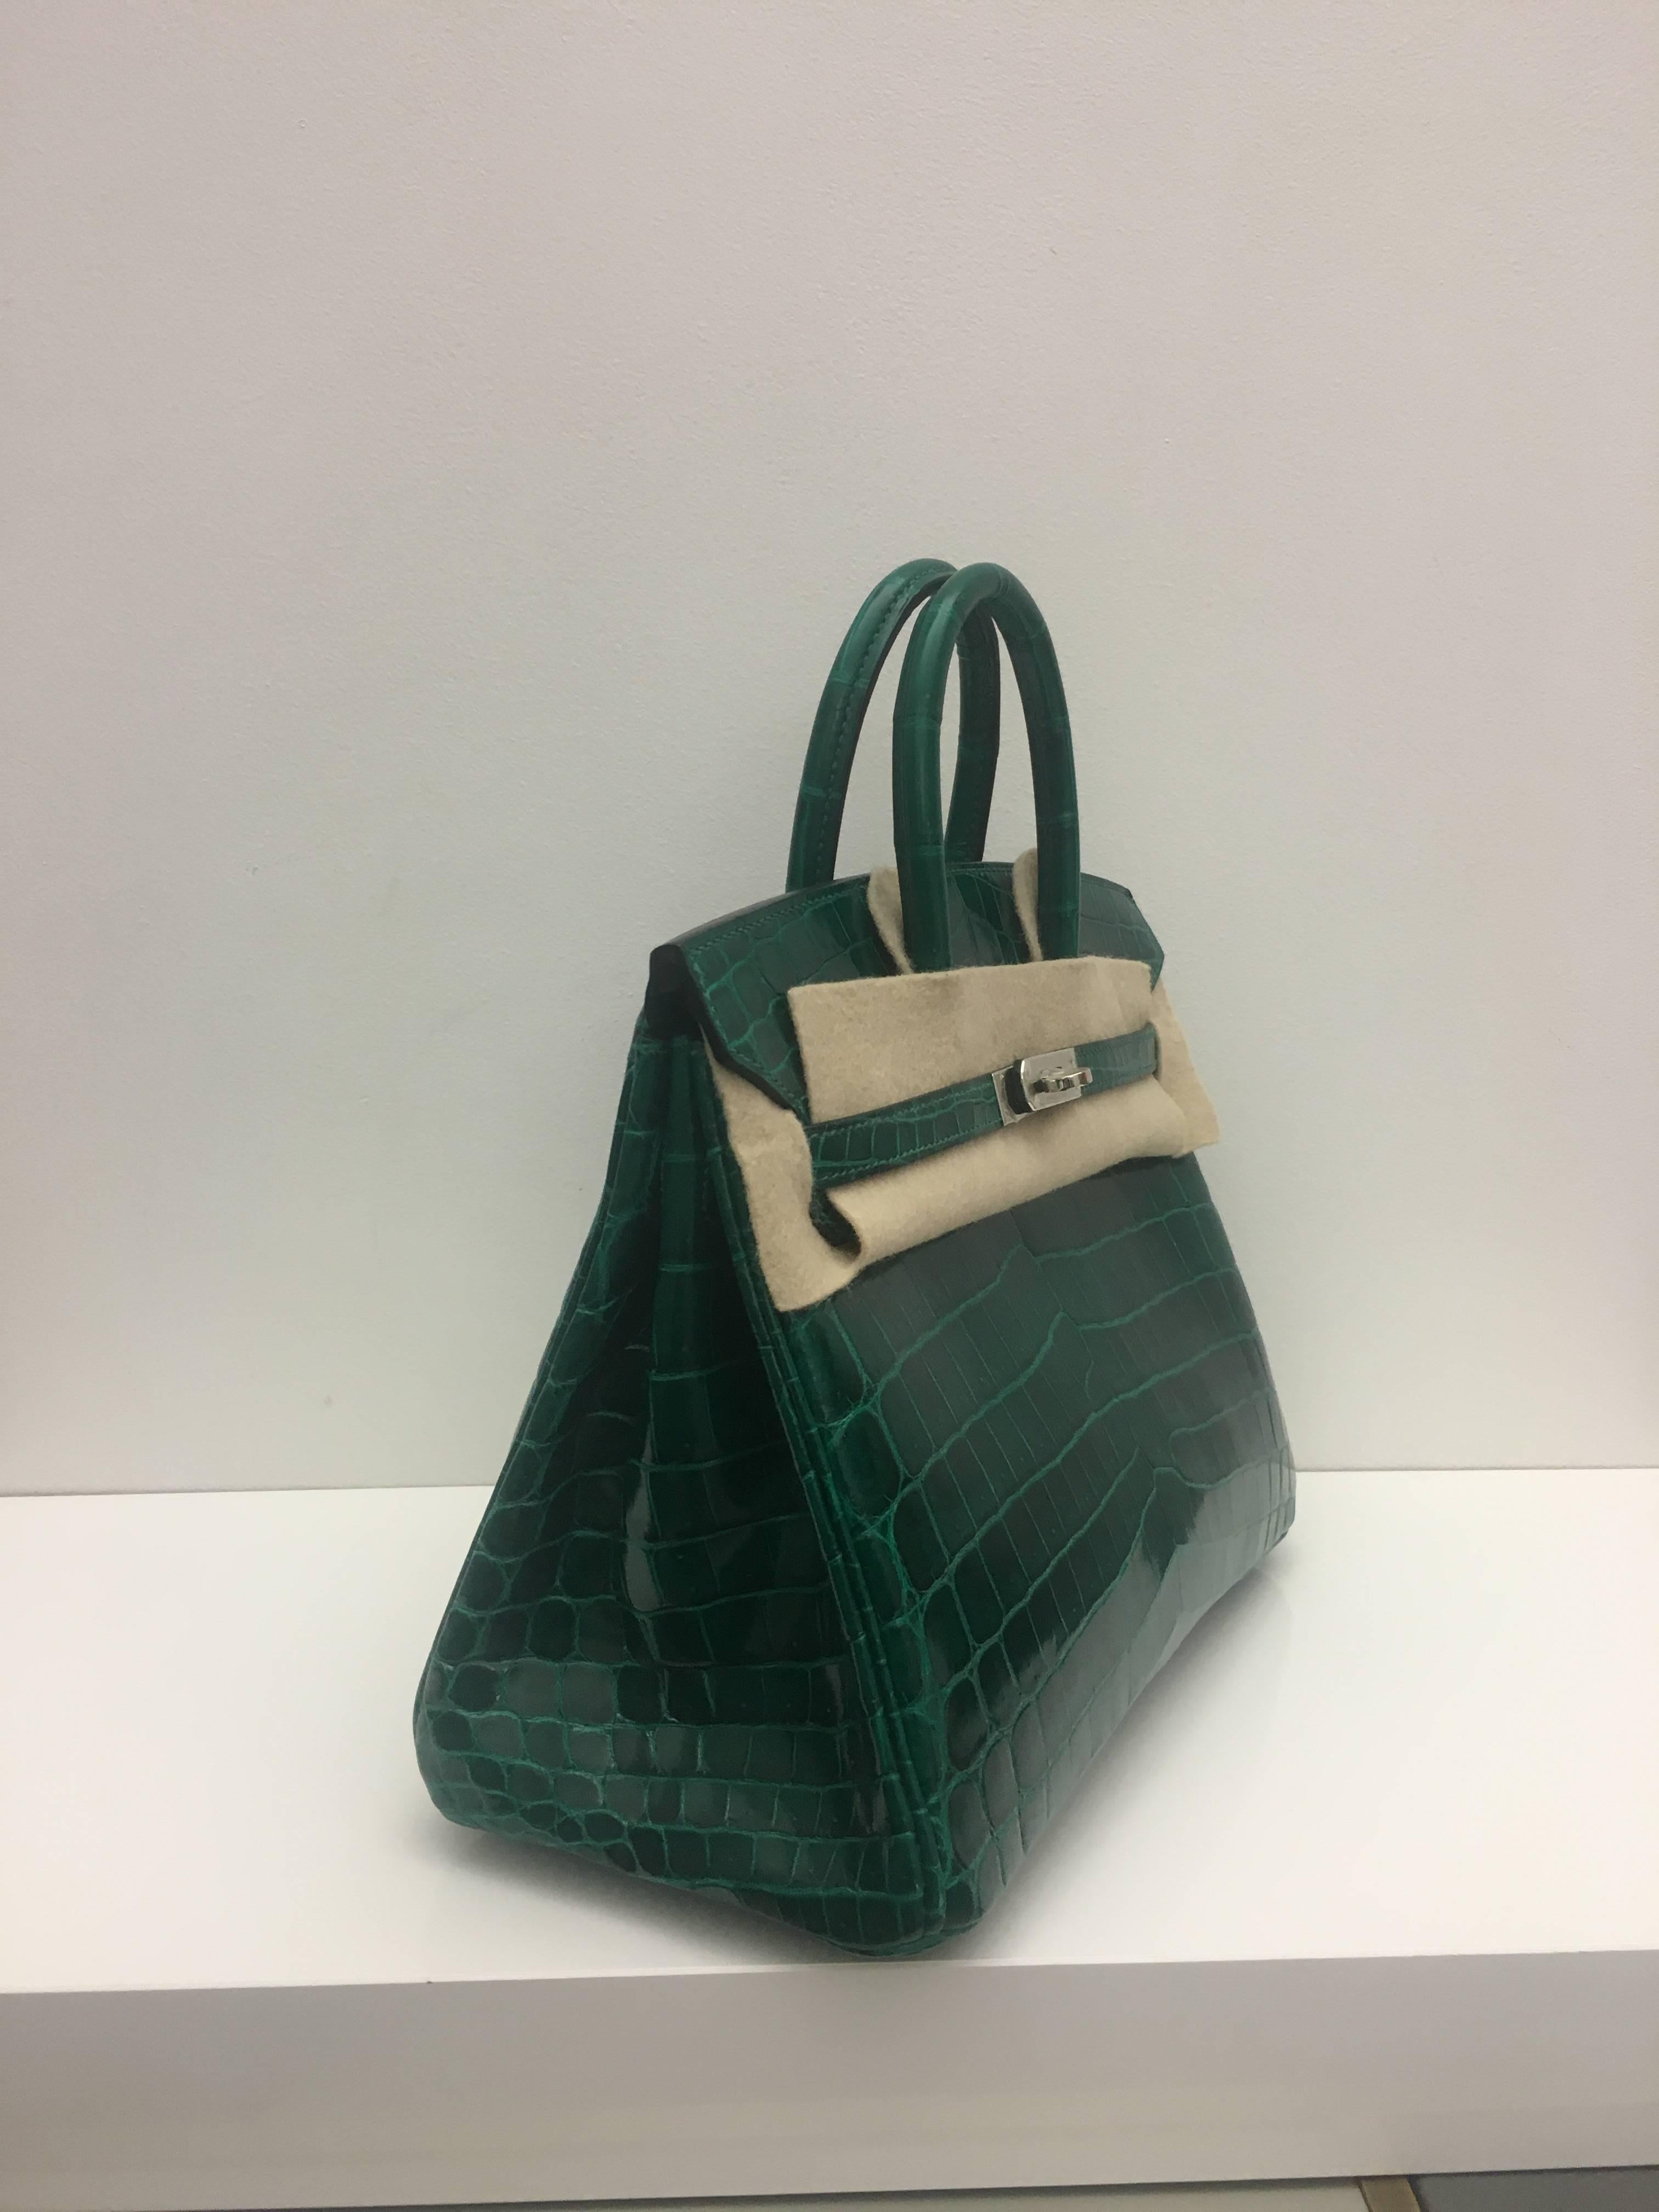 Hermes 
Birkin Size 25
Shiny Niloticus Croc
Colour Emerald Green 
Silver Hardware 
store fresh, comes with receipt and full set (dust bag, box...) 
Hydeparkfashion specializes in sourcing and delivering authentic luxury handbags, mainly